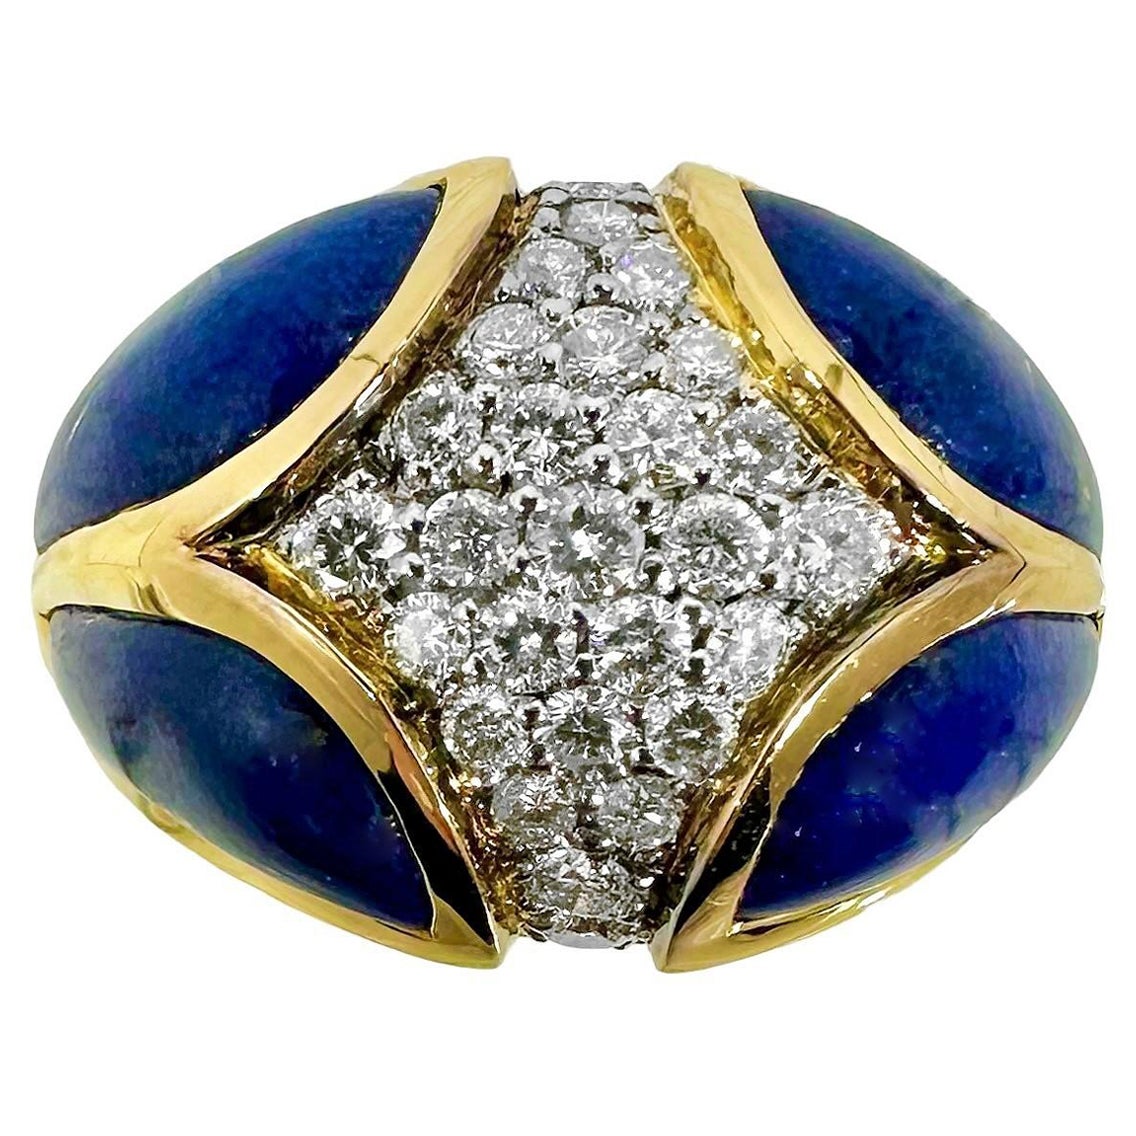 Late-20th Century 18k Yellow Gold, Lapis-Lazuli and Diamond Fashion Ring For Sale